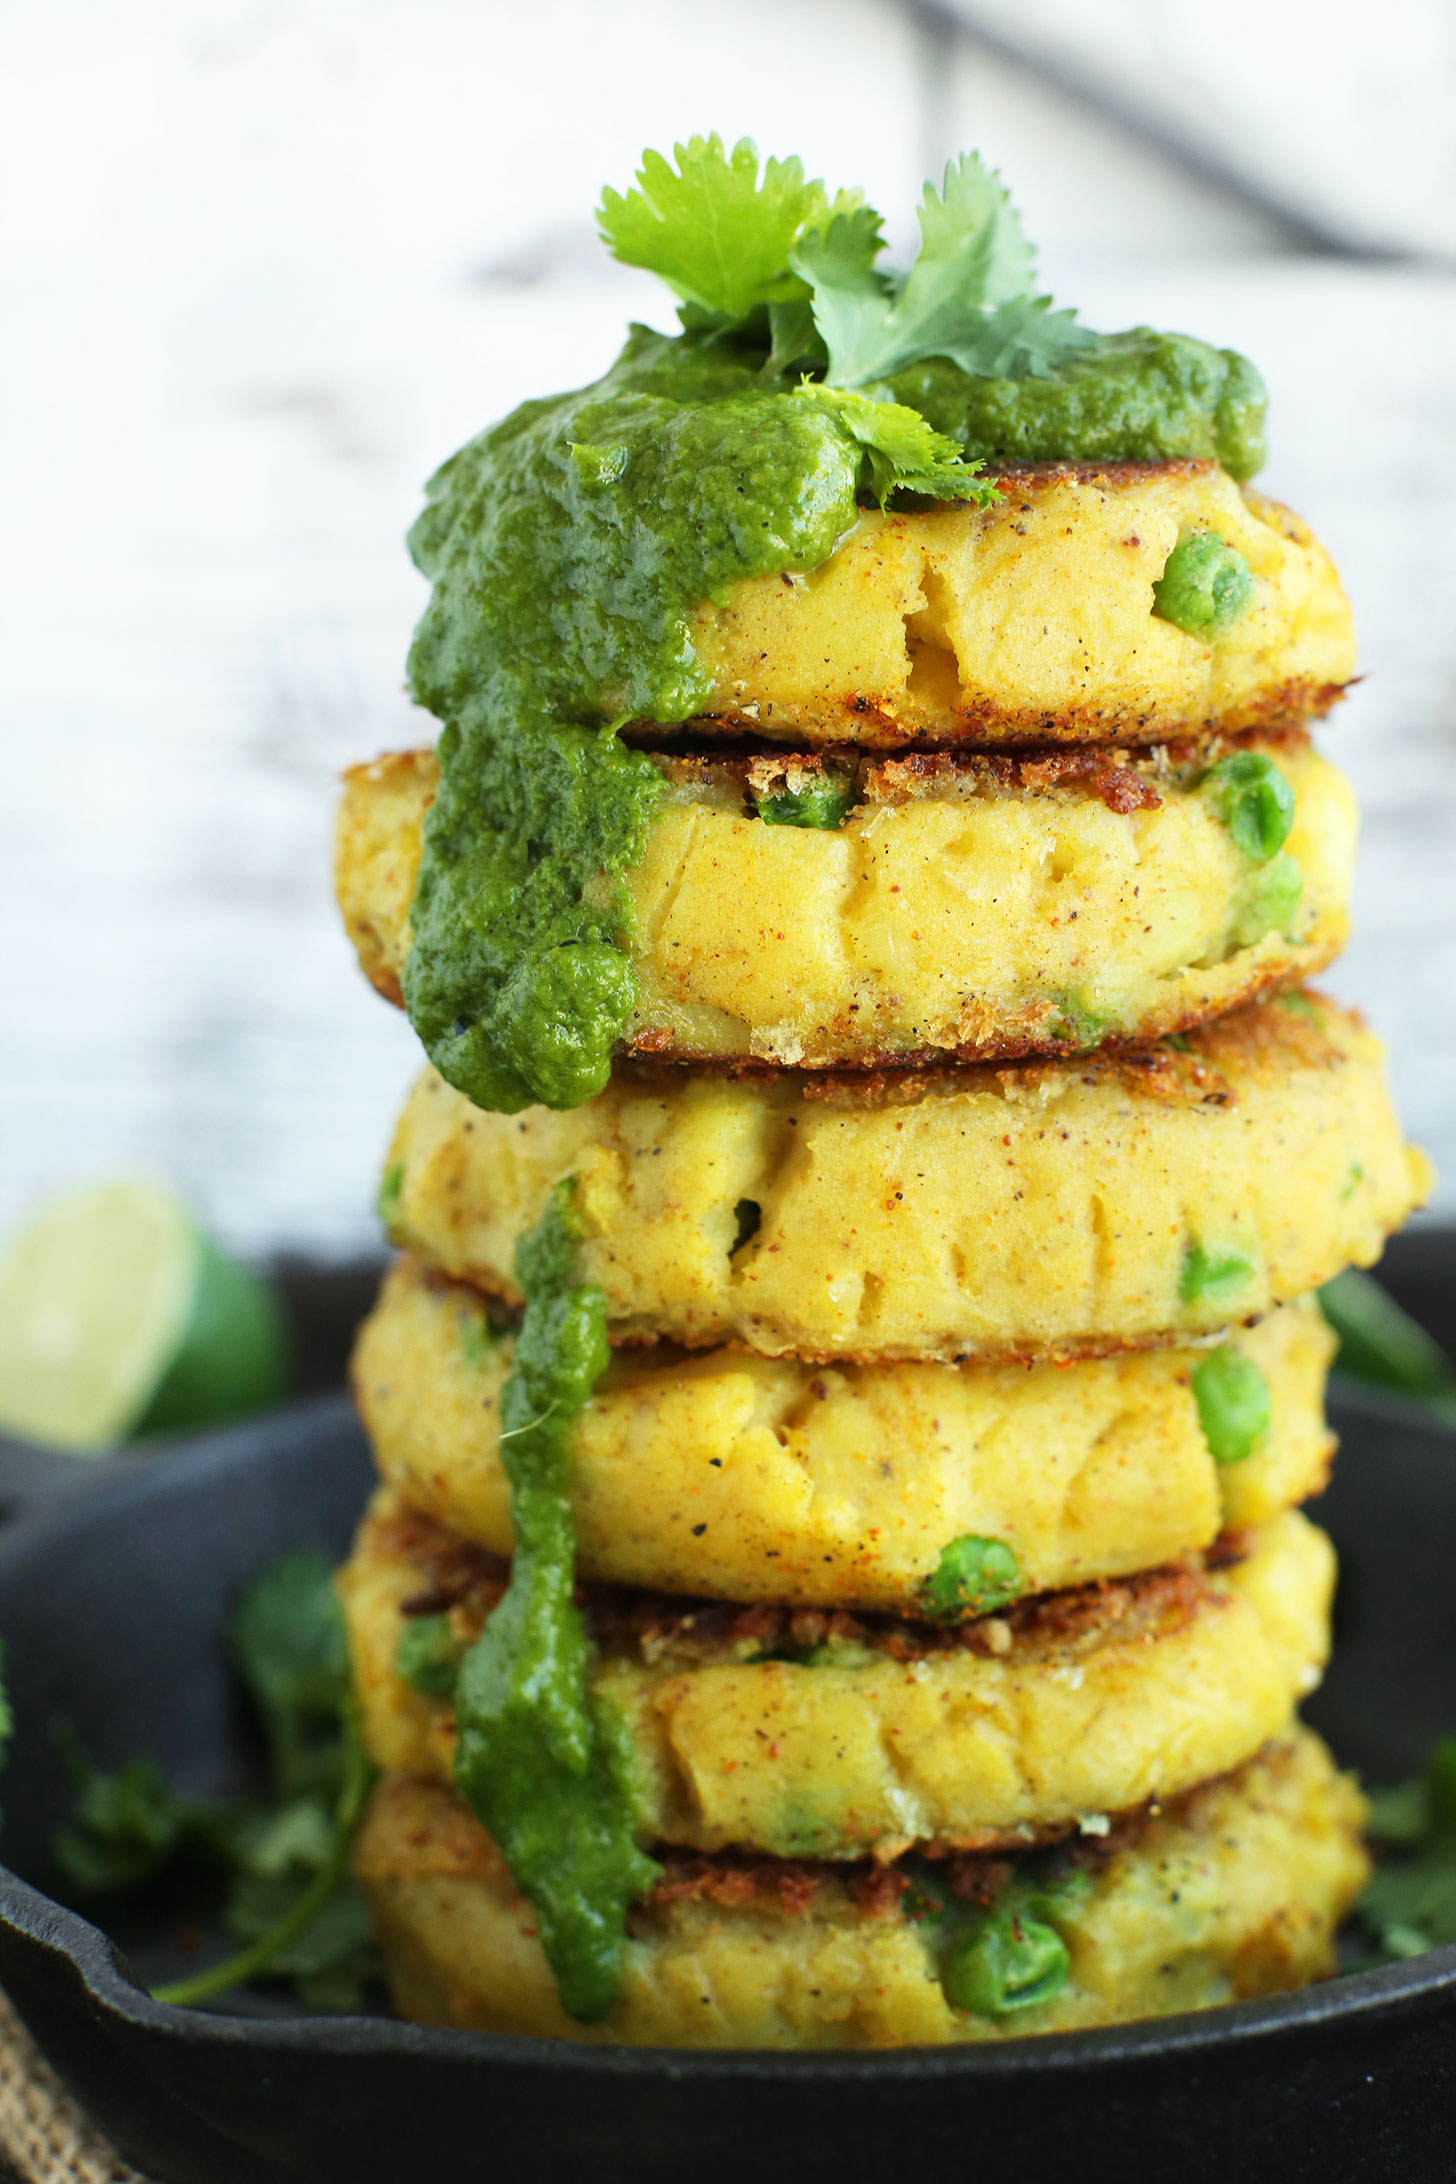 Stack of our Samosa-Inspired Potato Cakes with Chutney for a vegan gluten-free meal